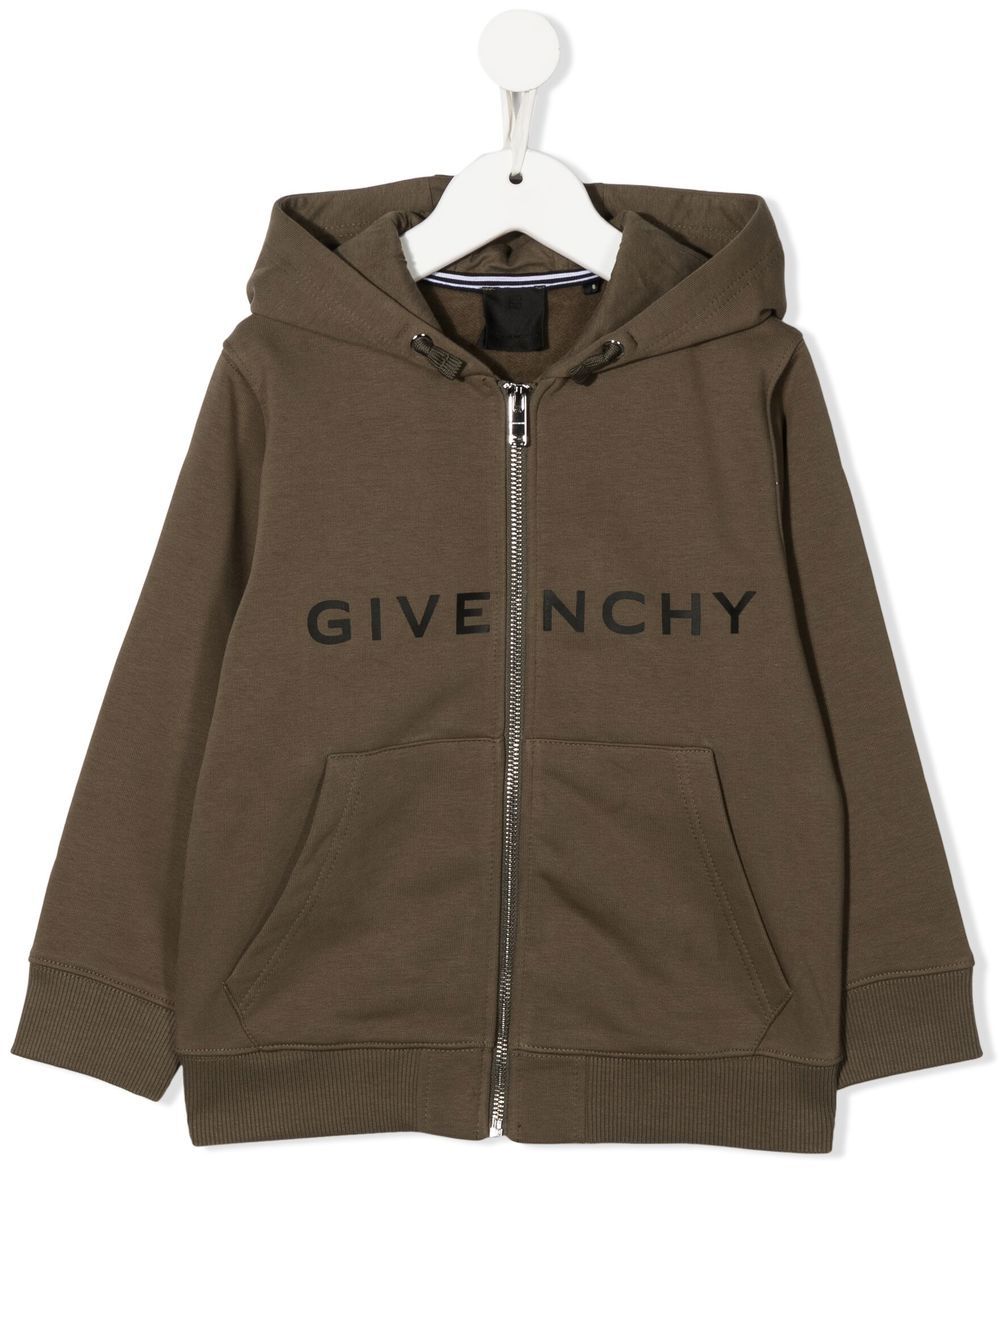 GIVENCHY ジバンシィ キッズ パーカー フーディ 100 110 4y - キッズ服 